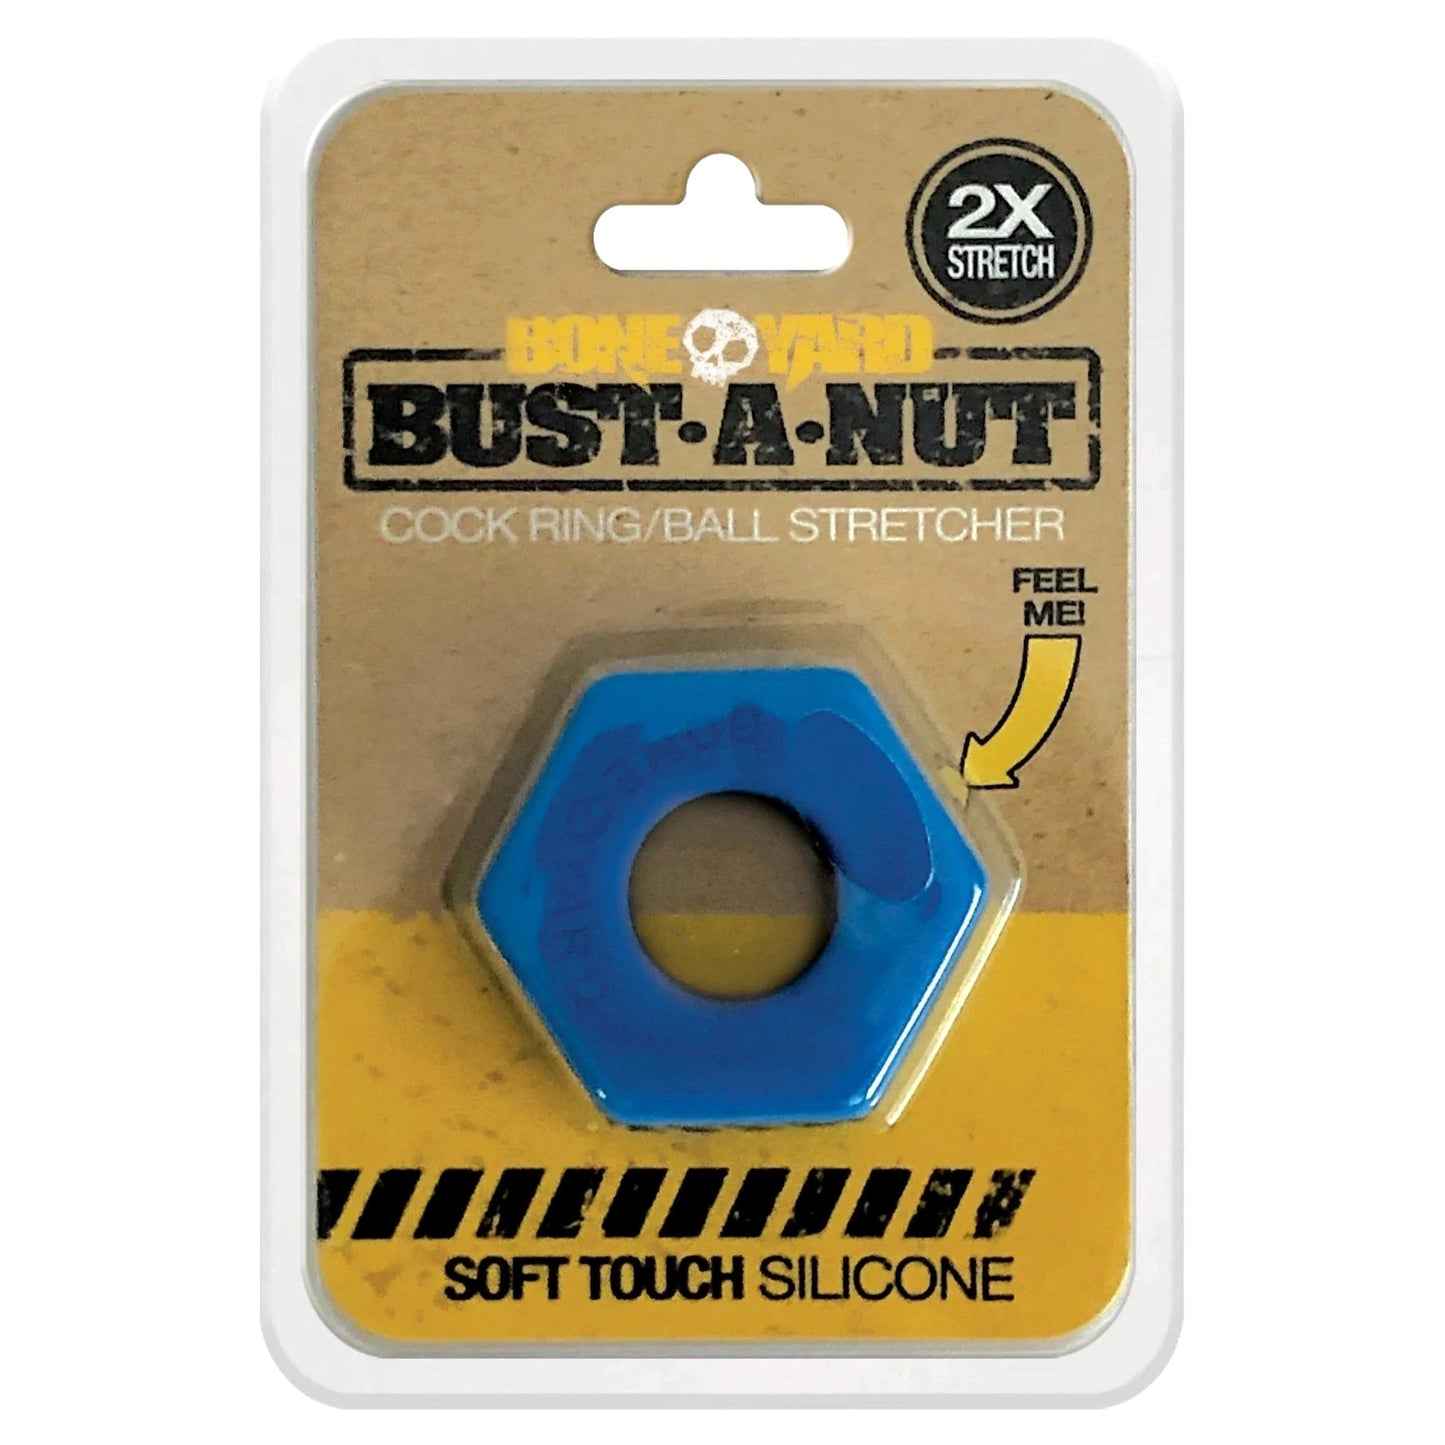 Boneyard Bust a Nut Cock Ring and Ball Stretcher